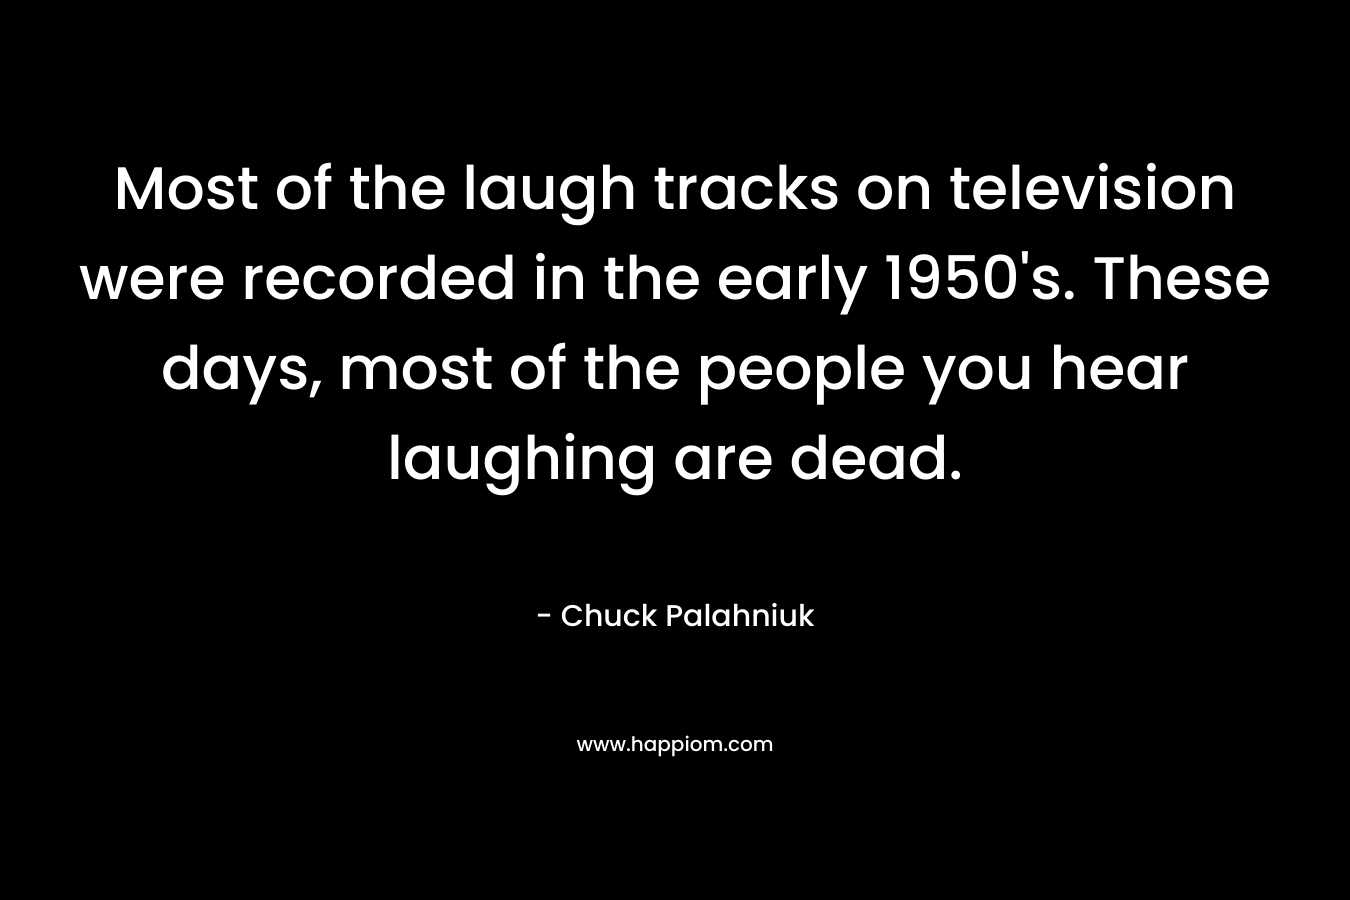 Most of the laugh tracks on television were recorded in the early 1950's. These days, most of the people you hear laughing are dead.